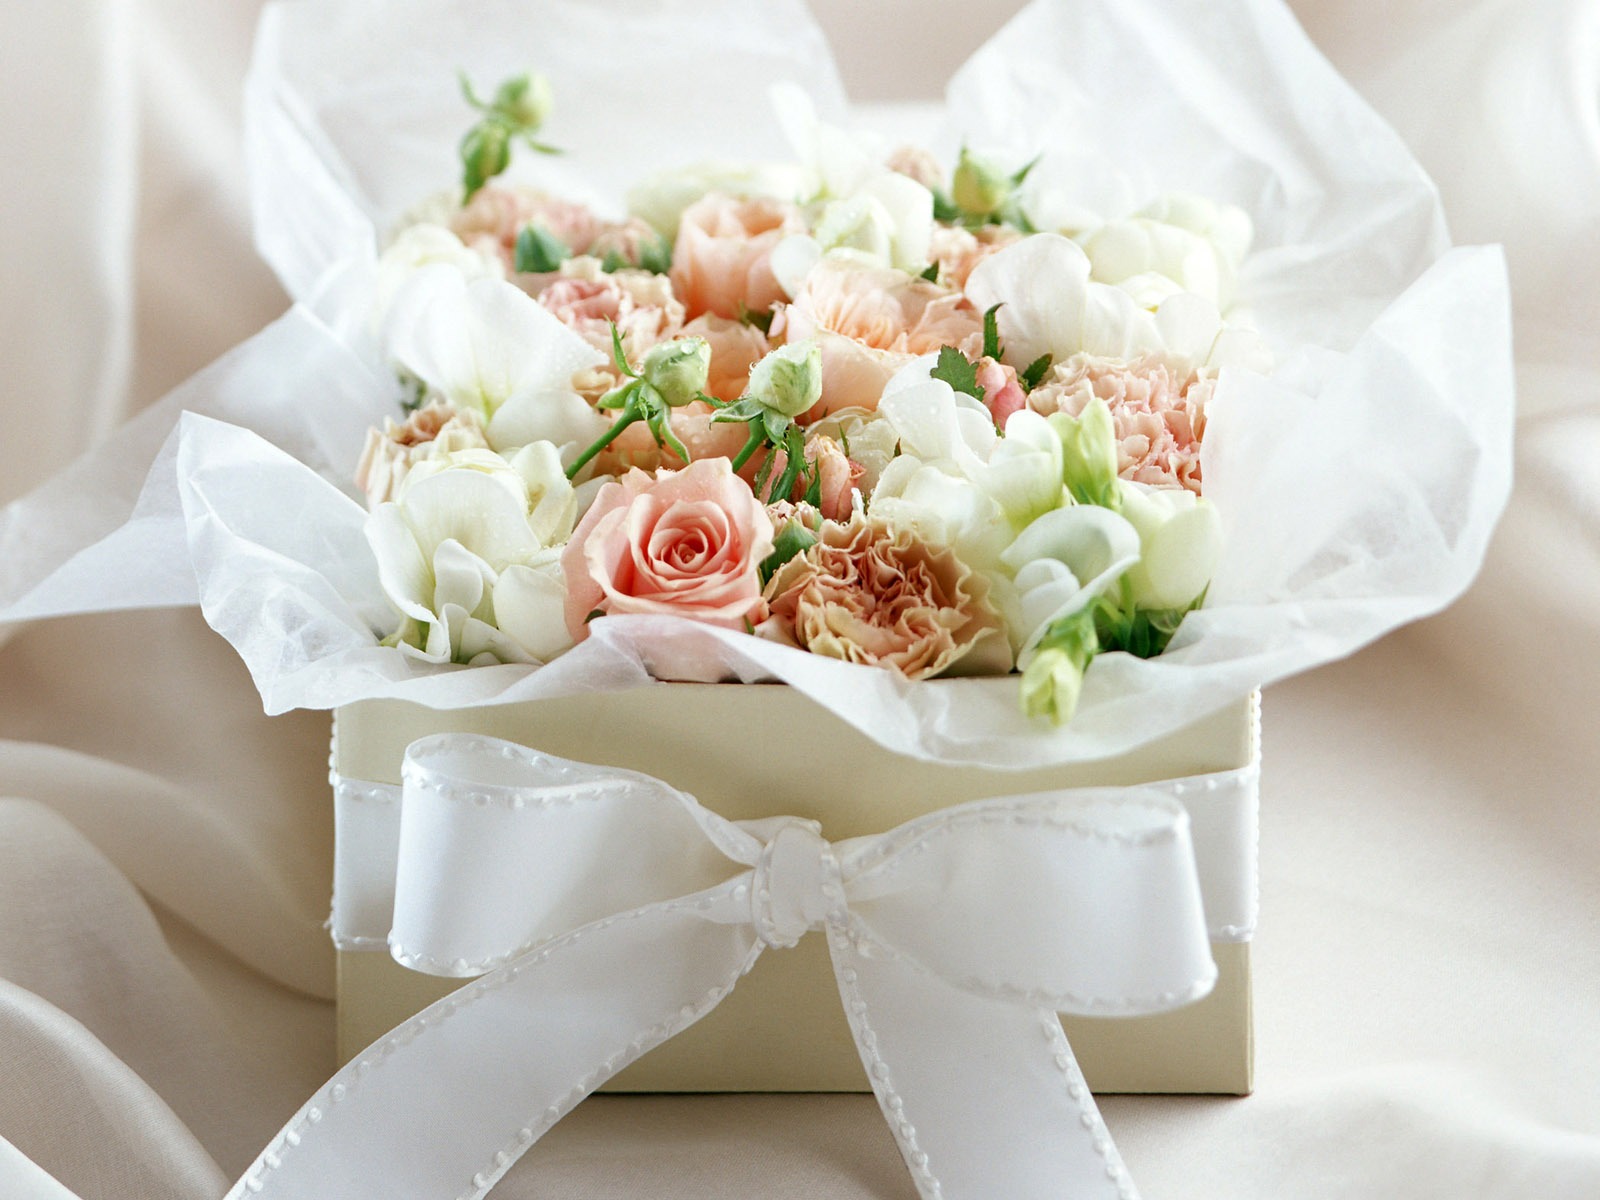 Flowers and gifts wallpaper (1) #7 - 1600x1200